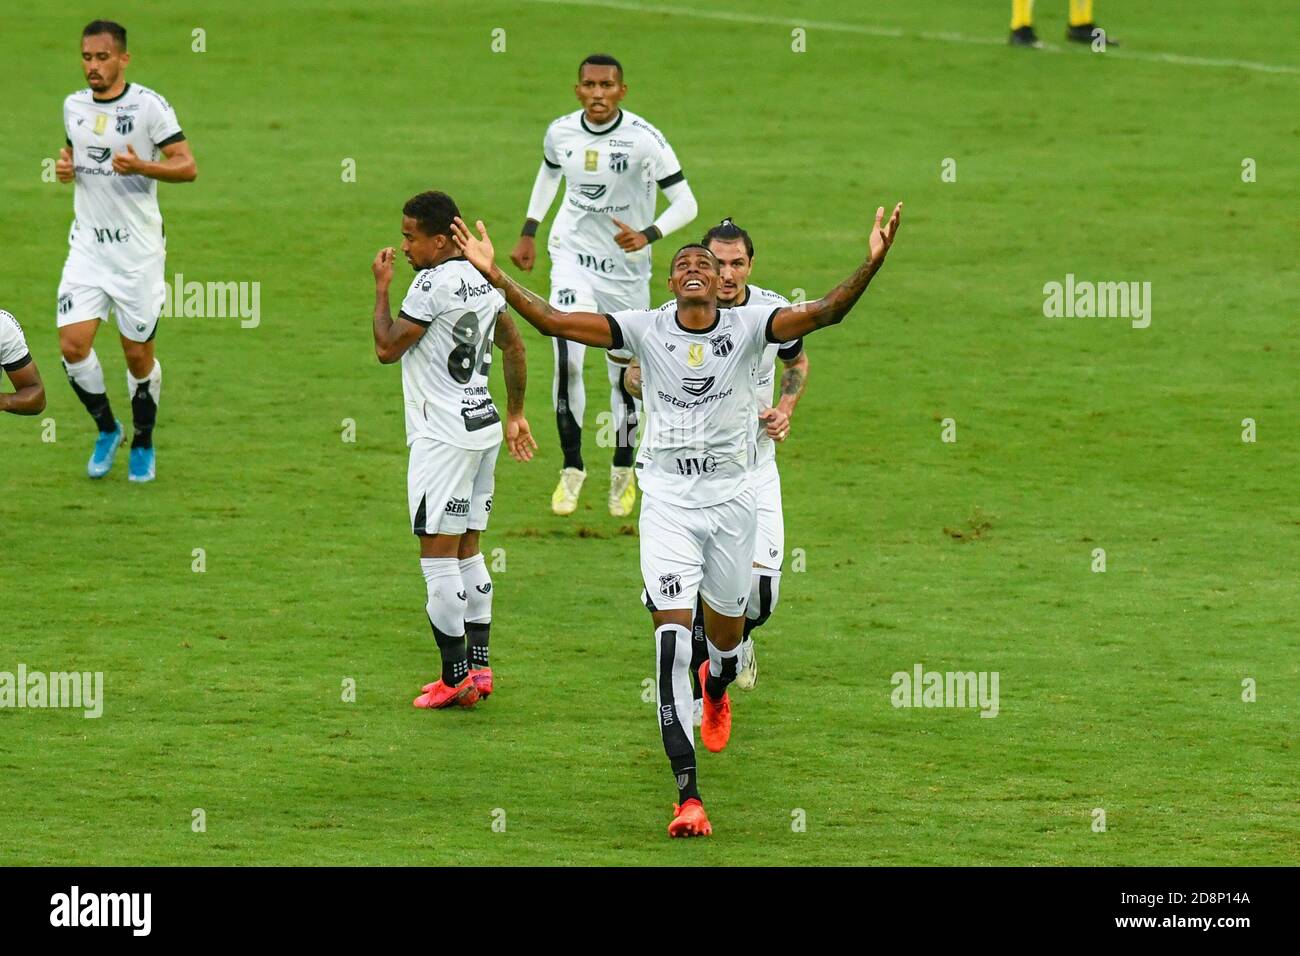 Rio De Janeiro, Brazil. 31st Oct, 2020. Cléber celebrates goal during Botafogo x Ceará held at Estádio Nilton Santos for the 19th round of the Brazilian Championship, in Rio de Janeiro, RJ, this Saturday afternoon (31). Credit: Celso Pupo/FotoArena/Alamy Live News Stock Photo